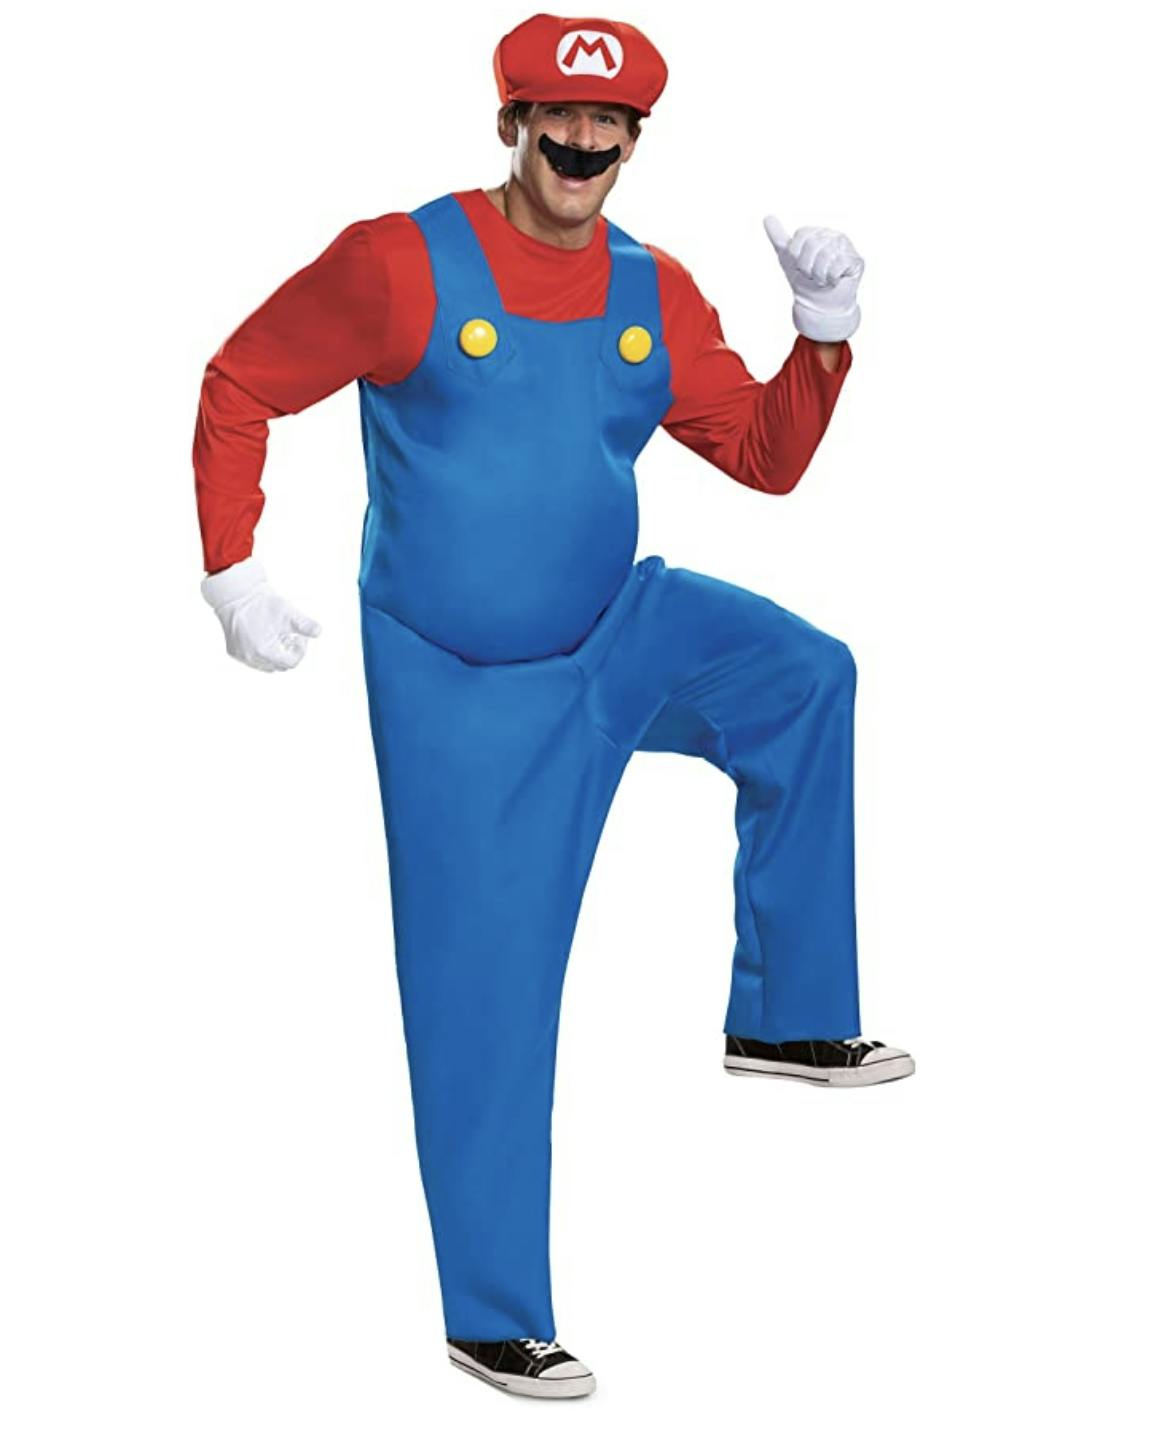 adult man in a blue overalls and a red shirt with big white gloves and a red hat, in the style of Mario